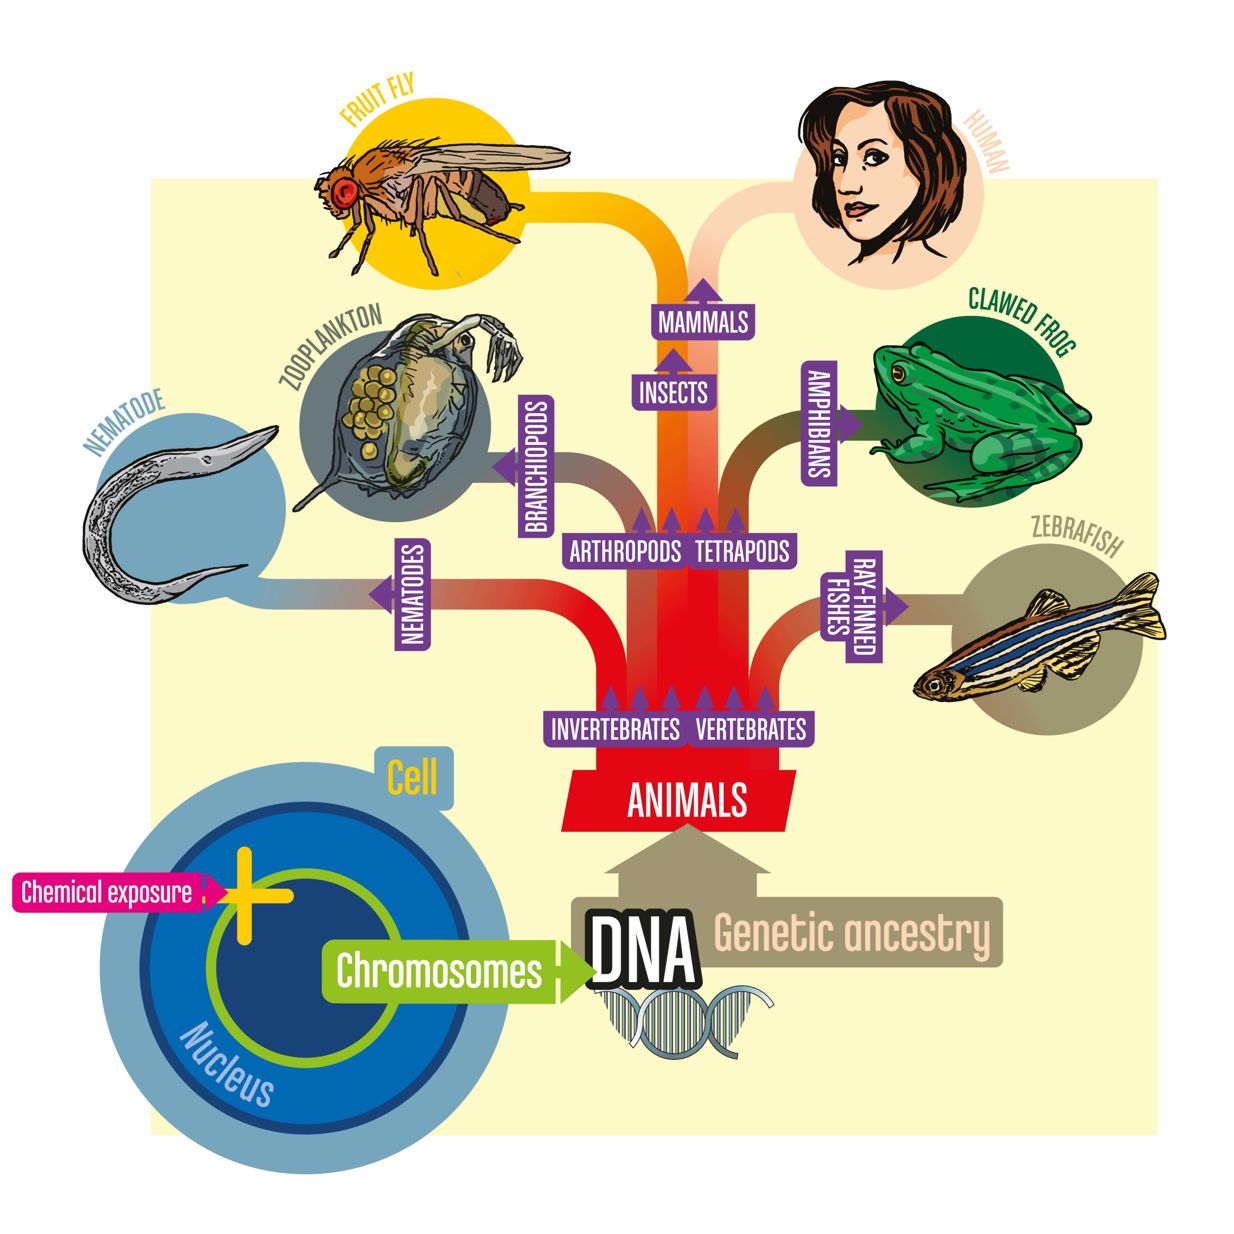 An illustrated diagram demonstrating the 5 species studied by the PrecisionTox research group.